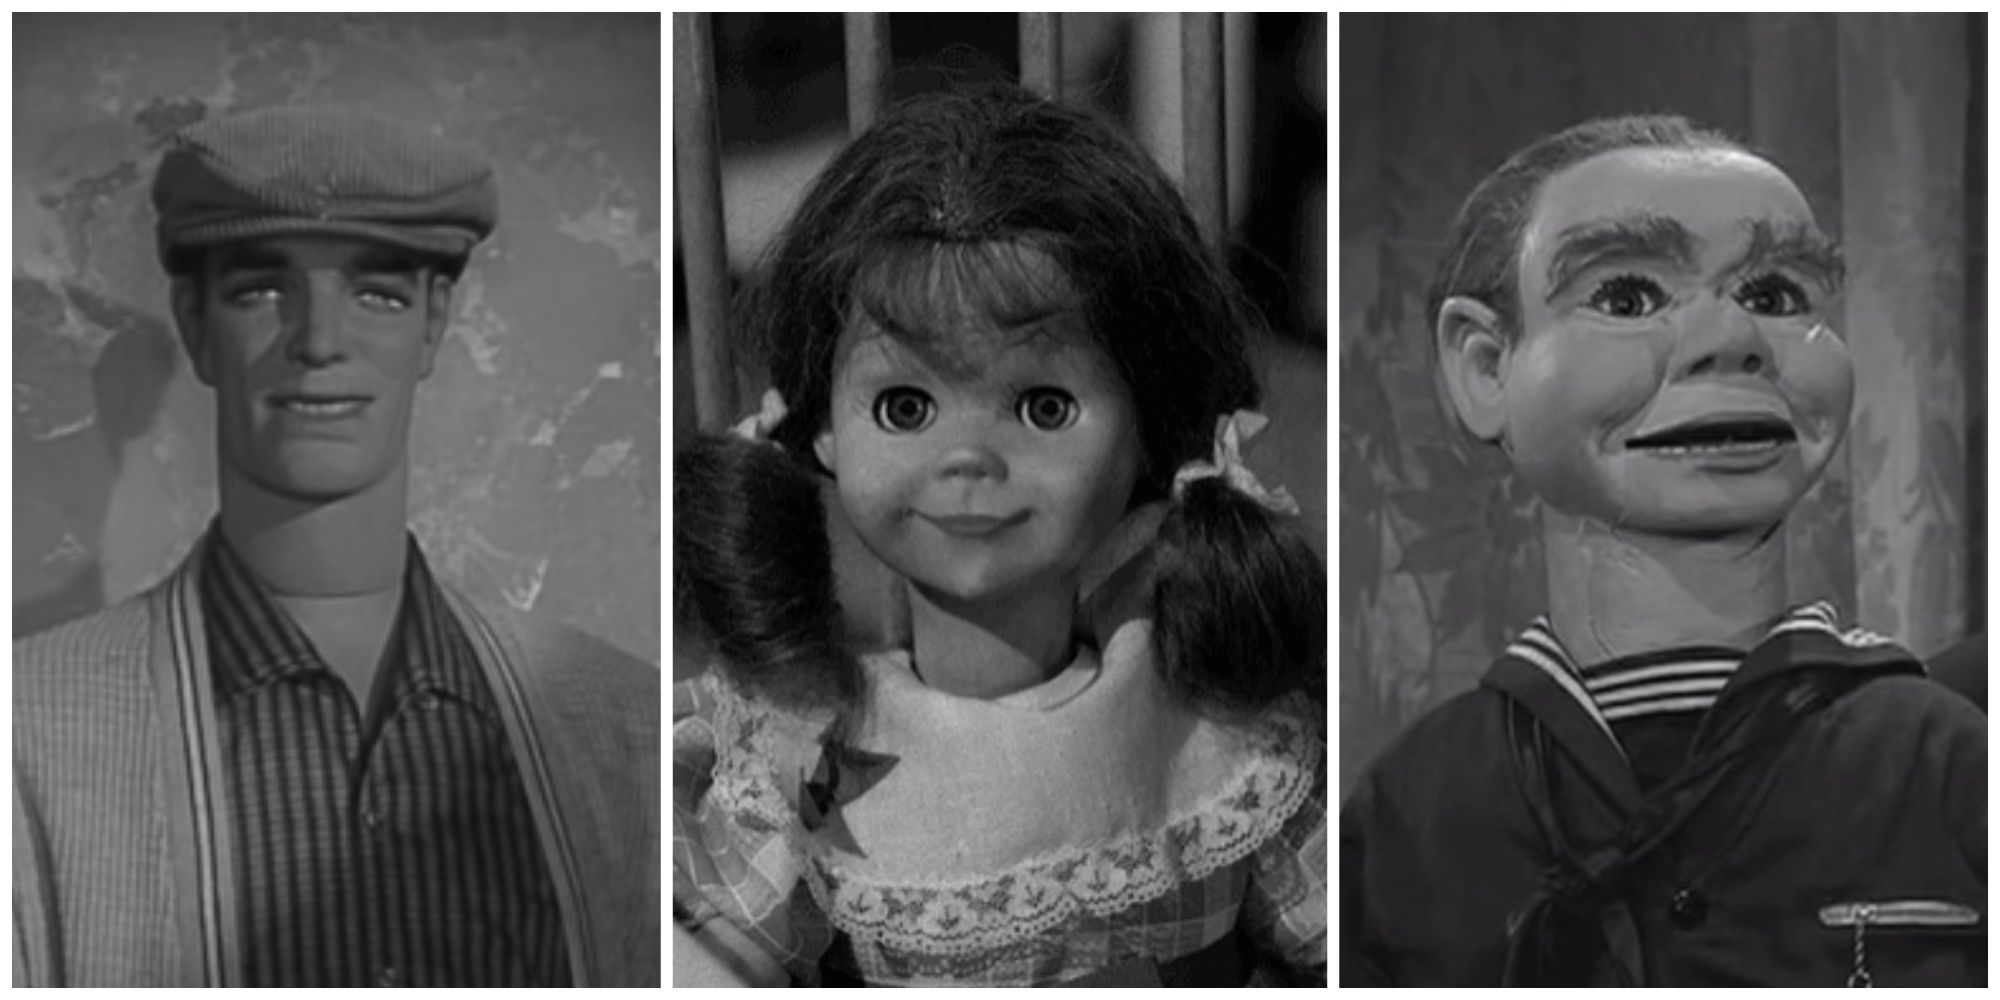 Split image showing images from spooky Twilight Zone episodes (The After Hours, Living Doll, and The Dummy).